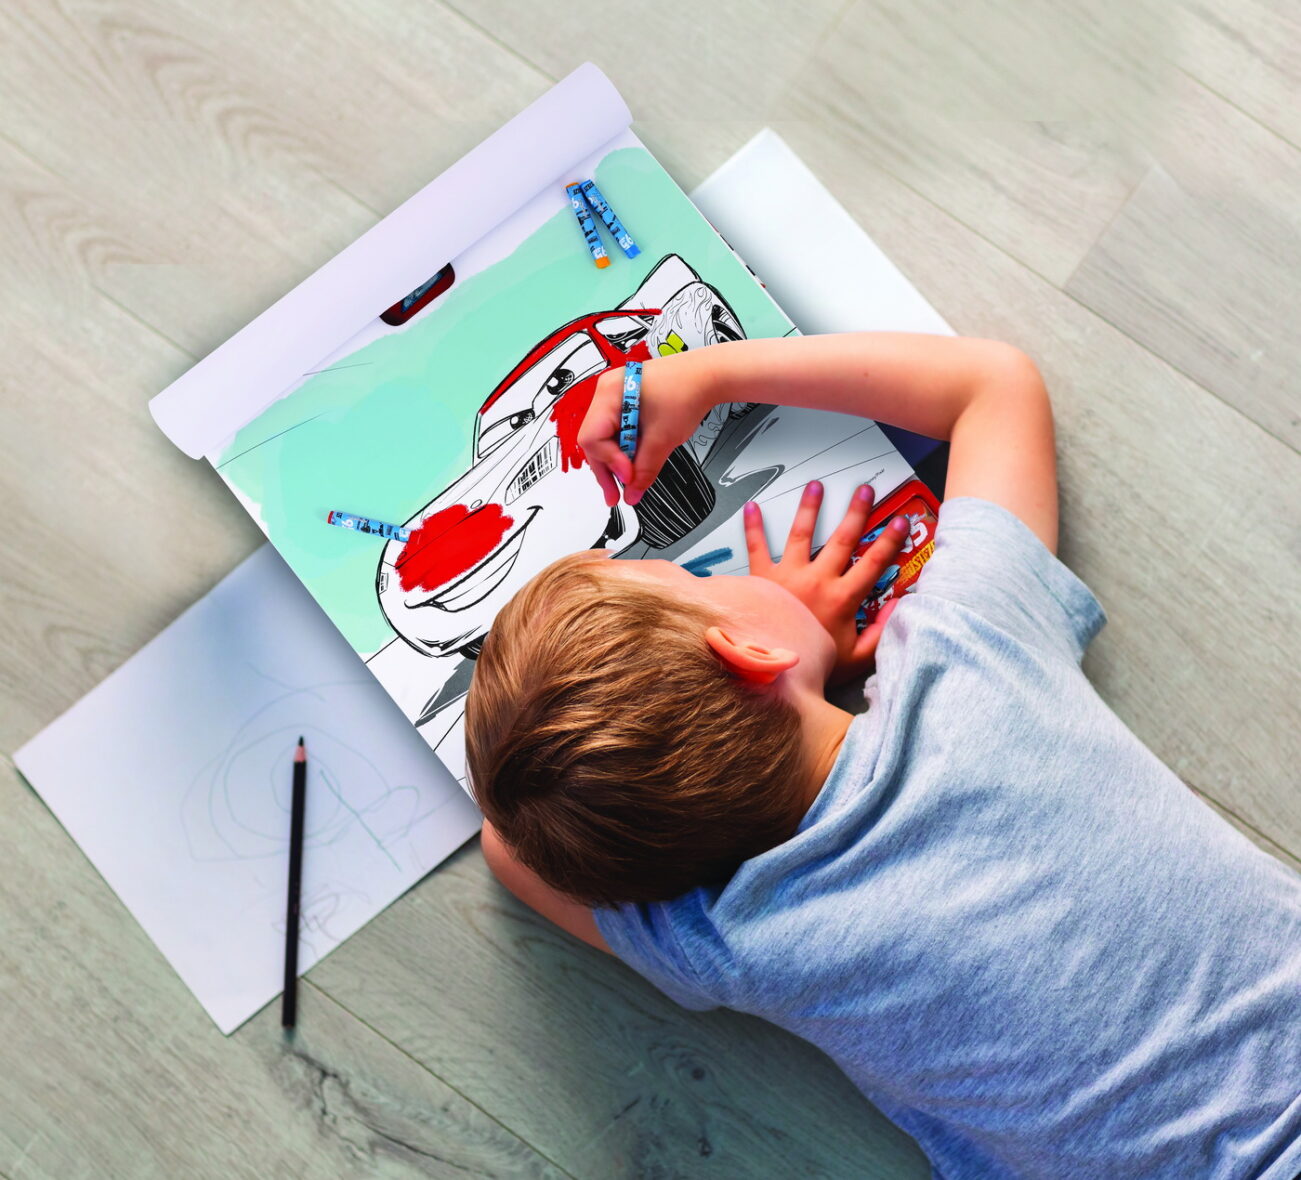 Little boy drawing on the floor in his room